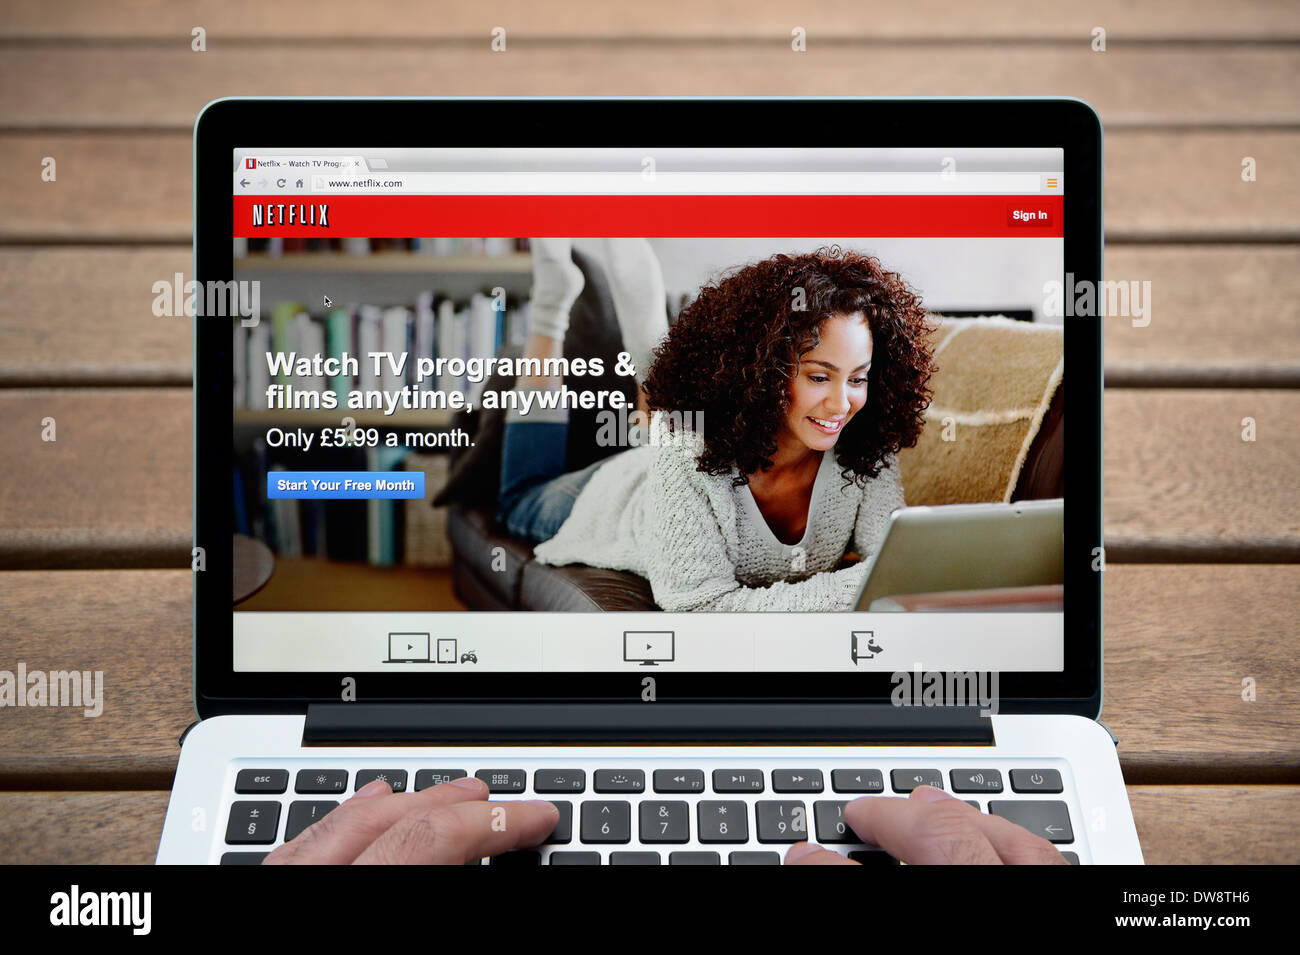 The Netflix website on a MacBook against a wooden bench outdoor background including a man's fingers (Editorial use only). Stock Photo